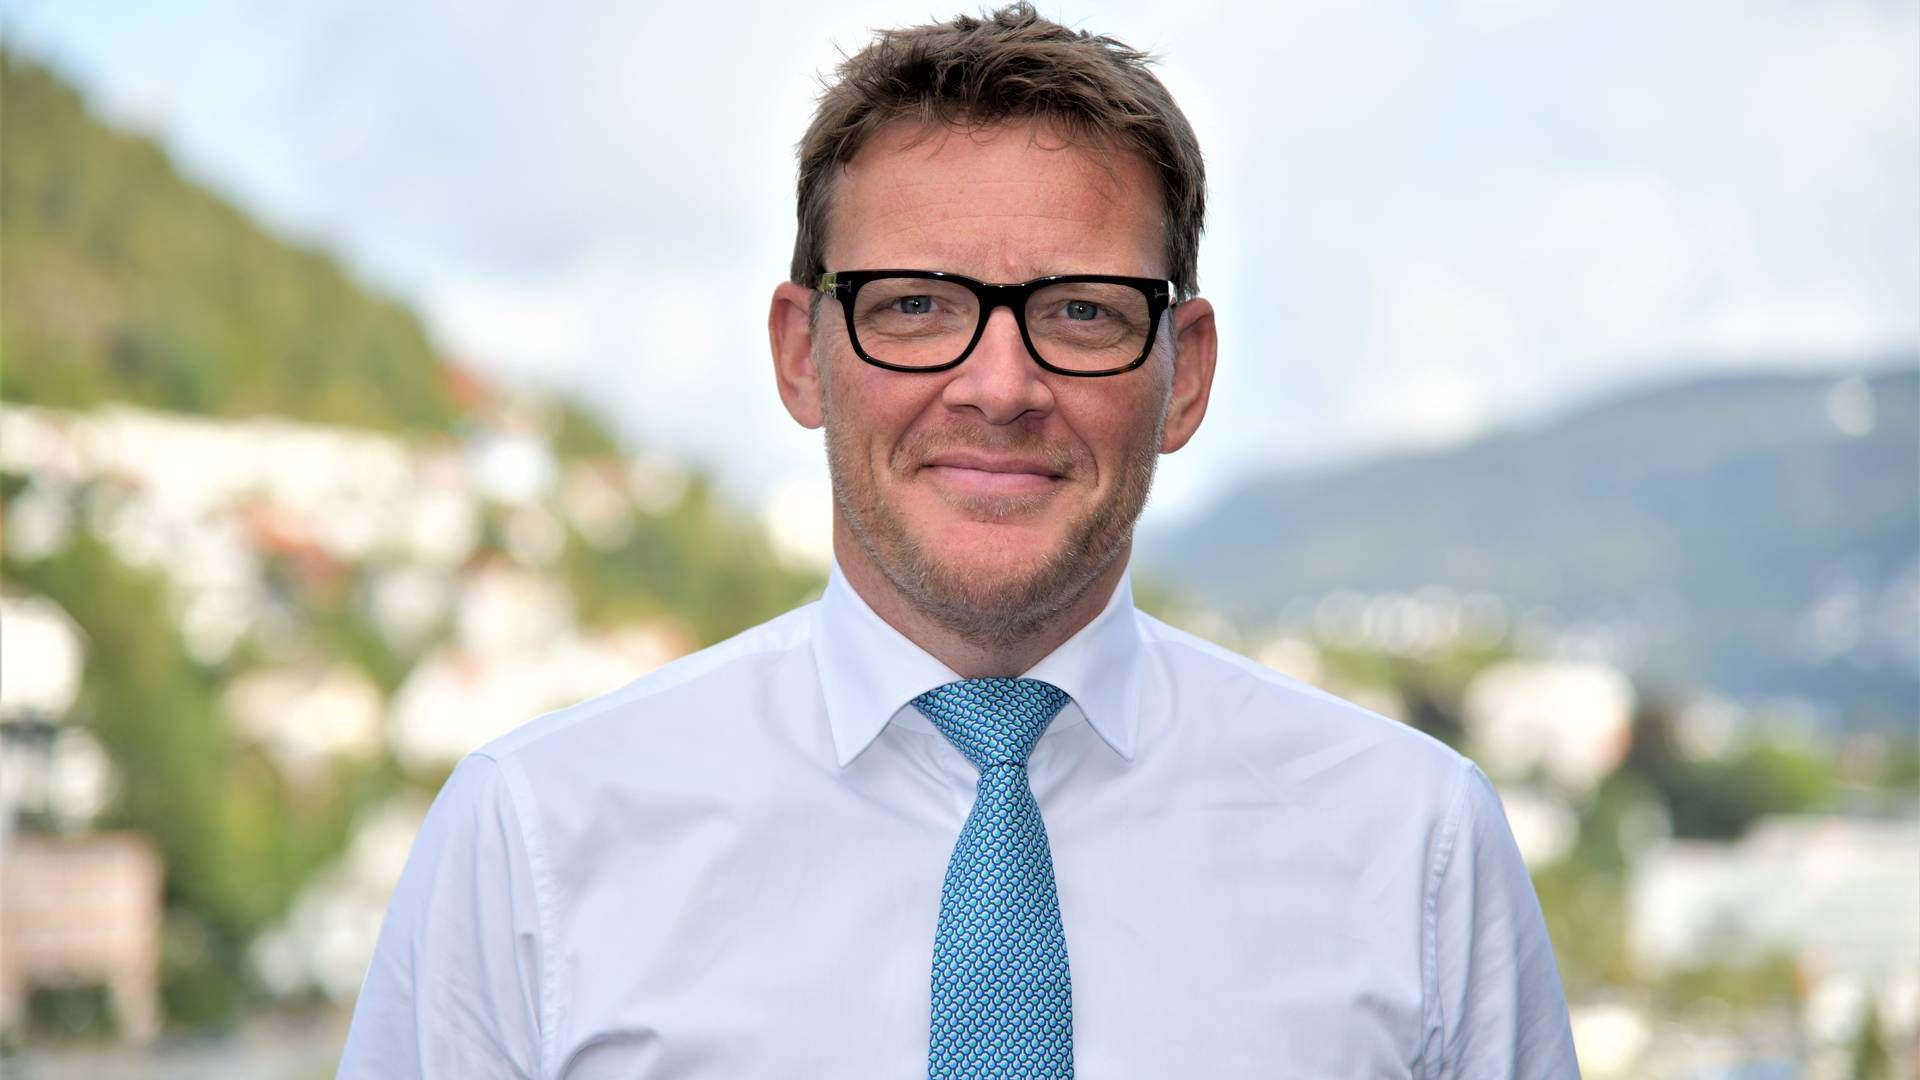 Kristian Mørch is chief executive officer of investment company J. Lauritzen. | Photo: Gunnar Eide/odfjell